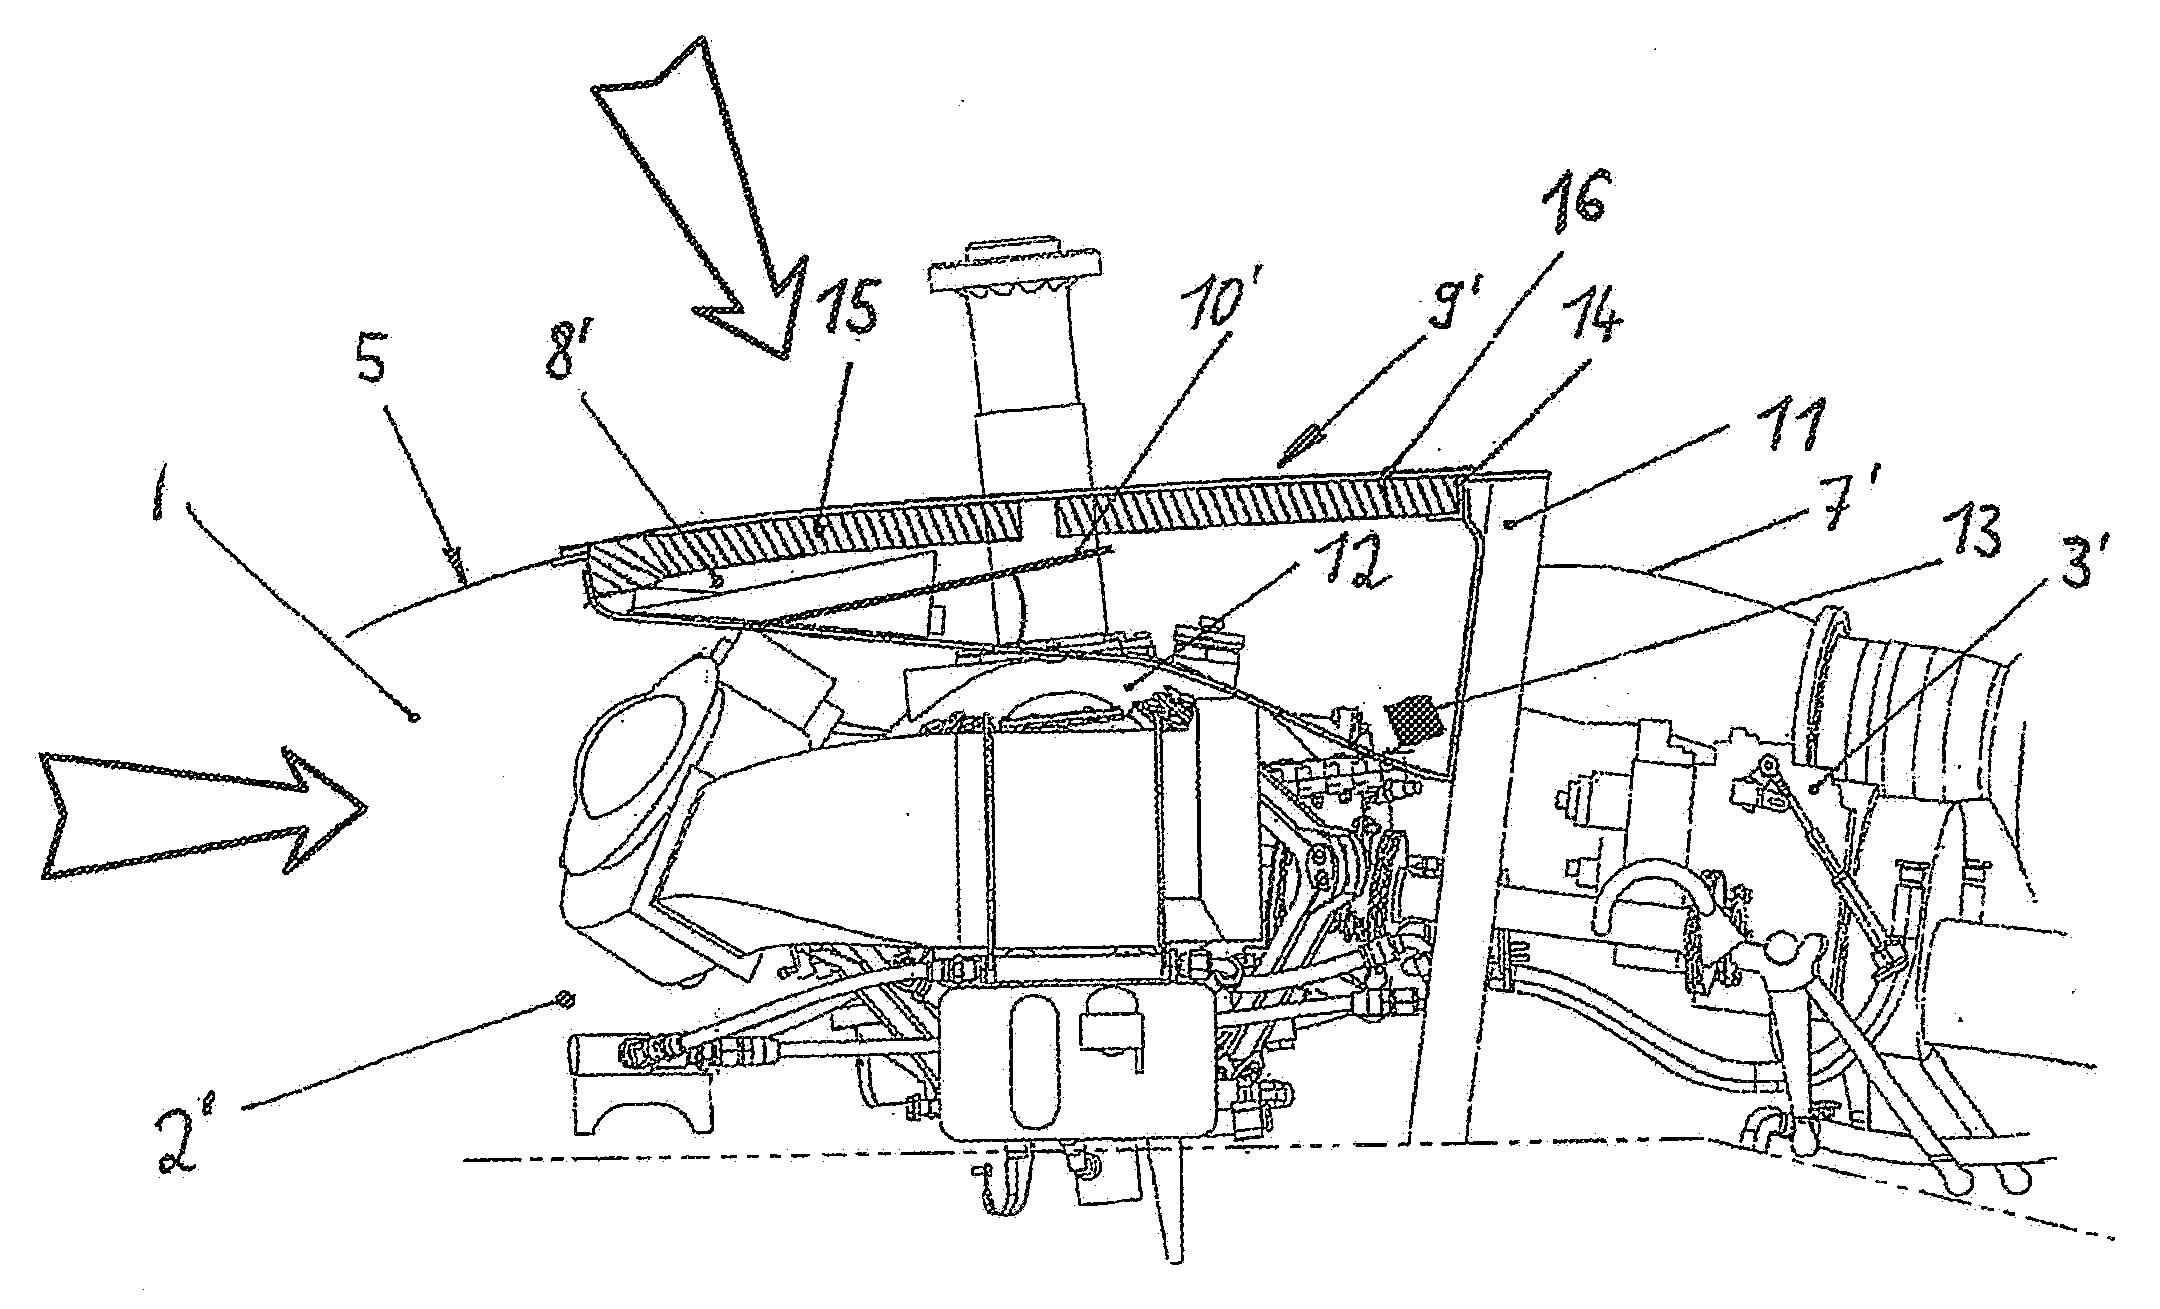 Device for feeding combustion air to an engine of an aircraft